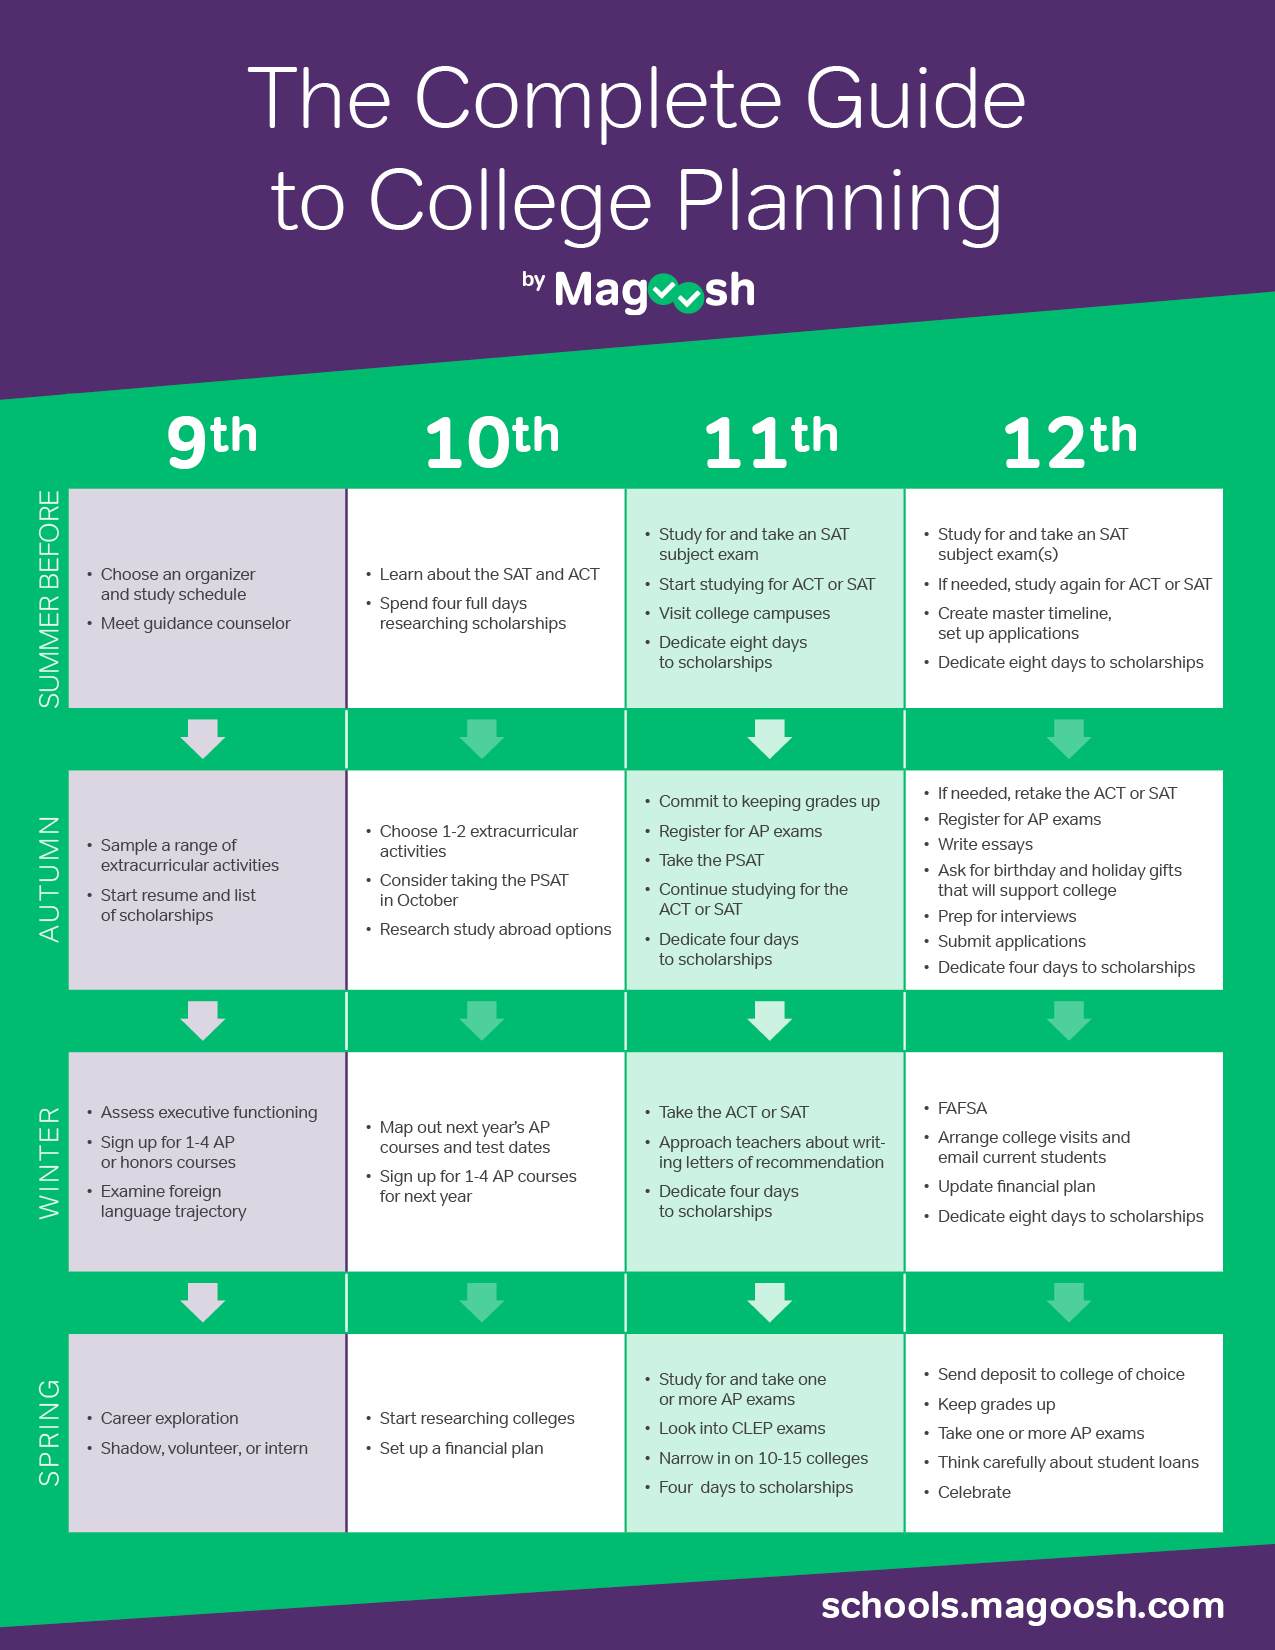 Your 12th grade college planning guide